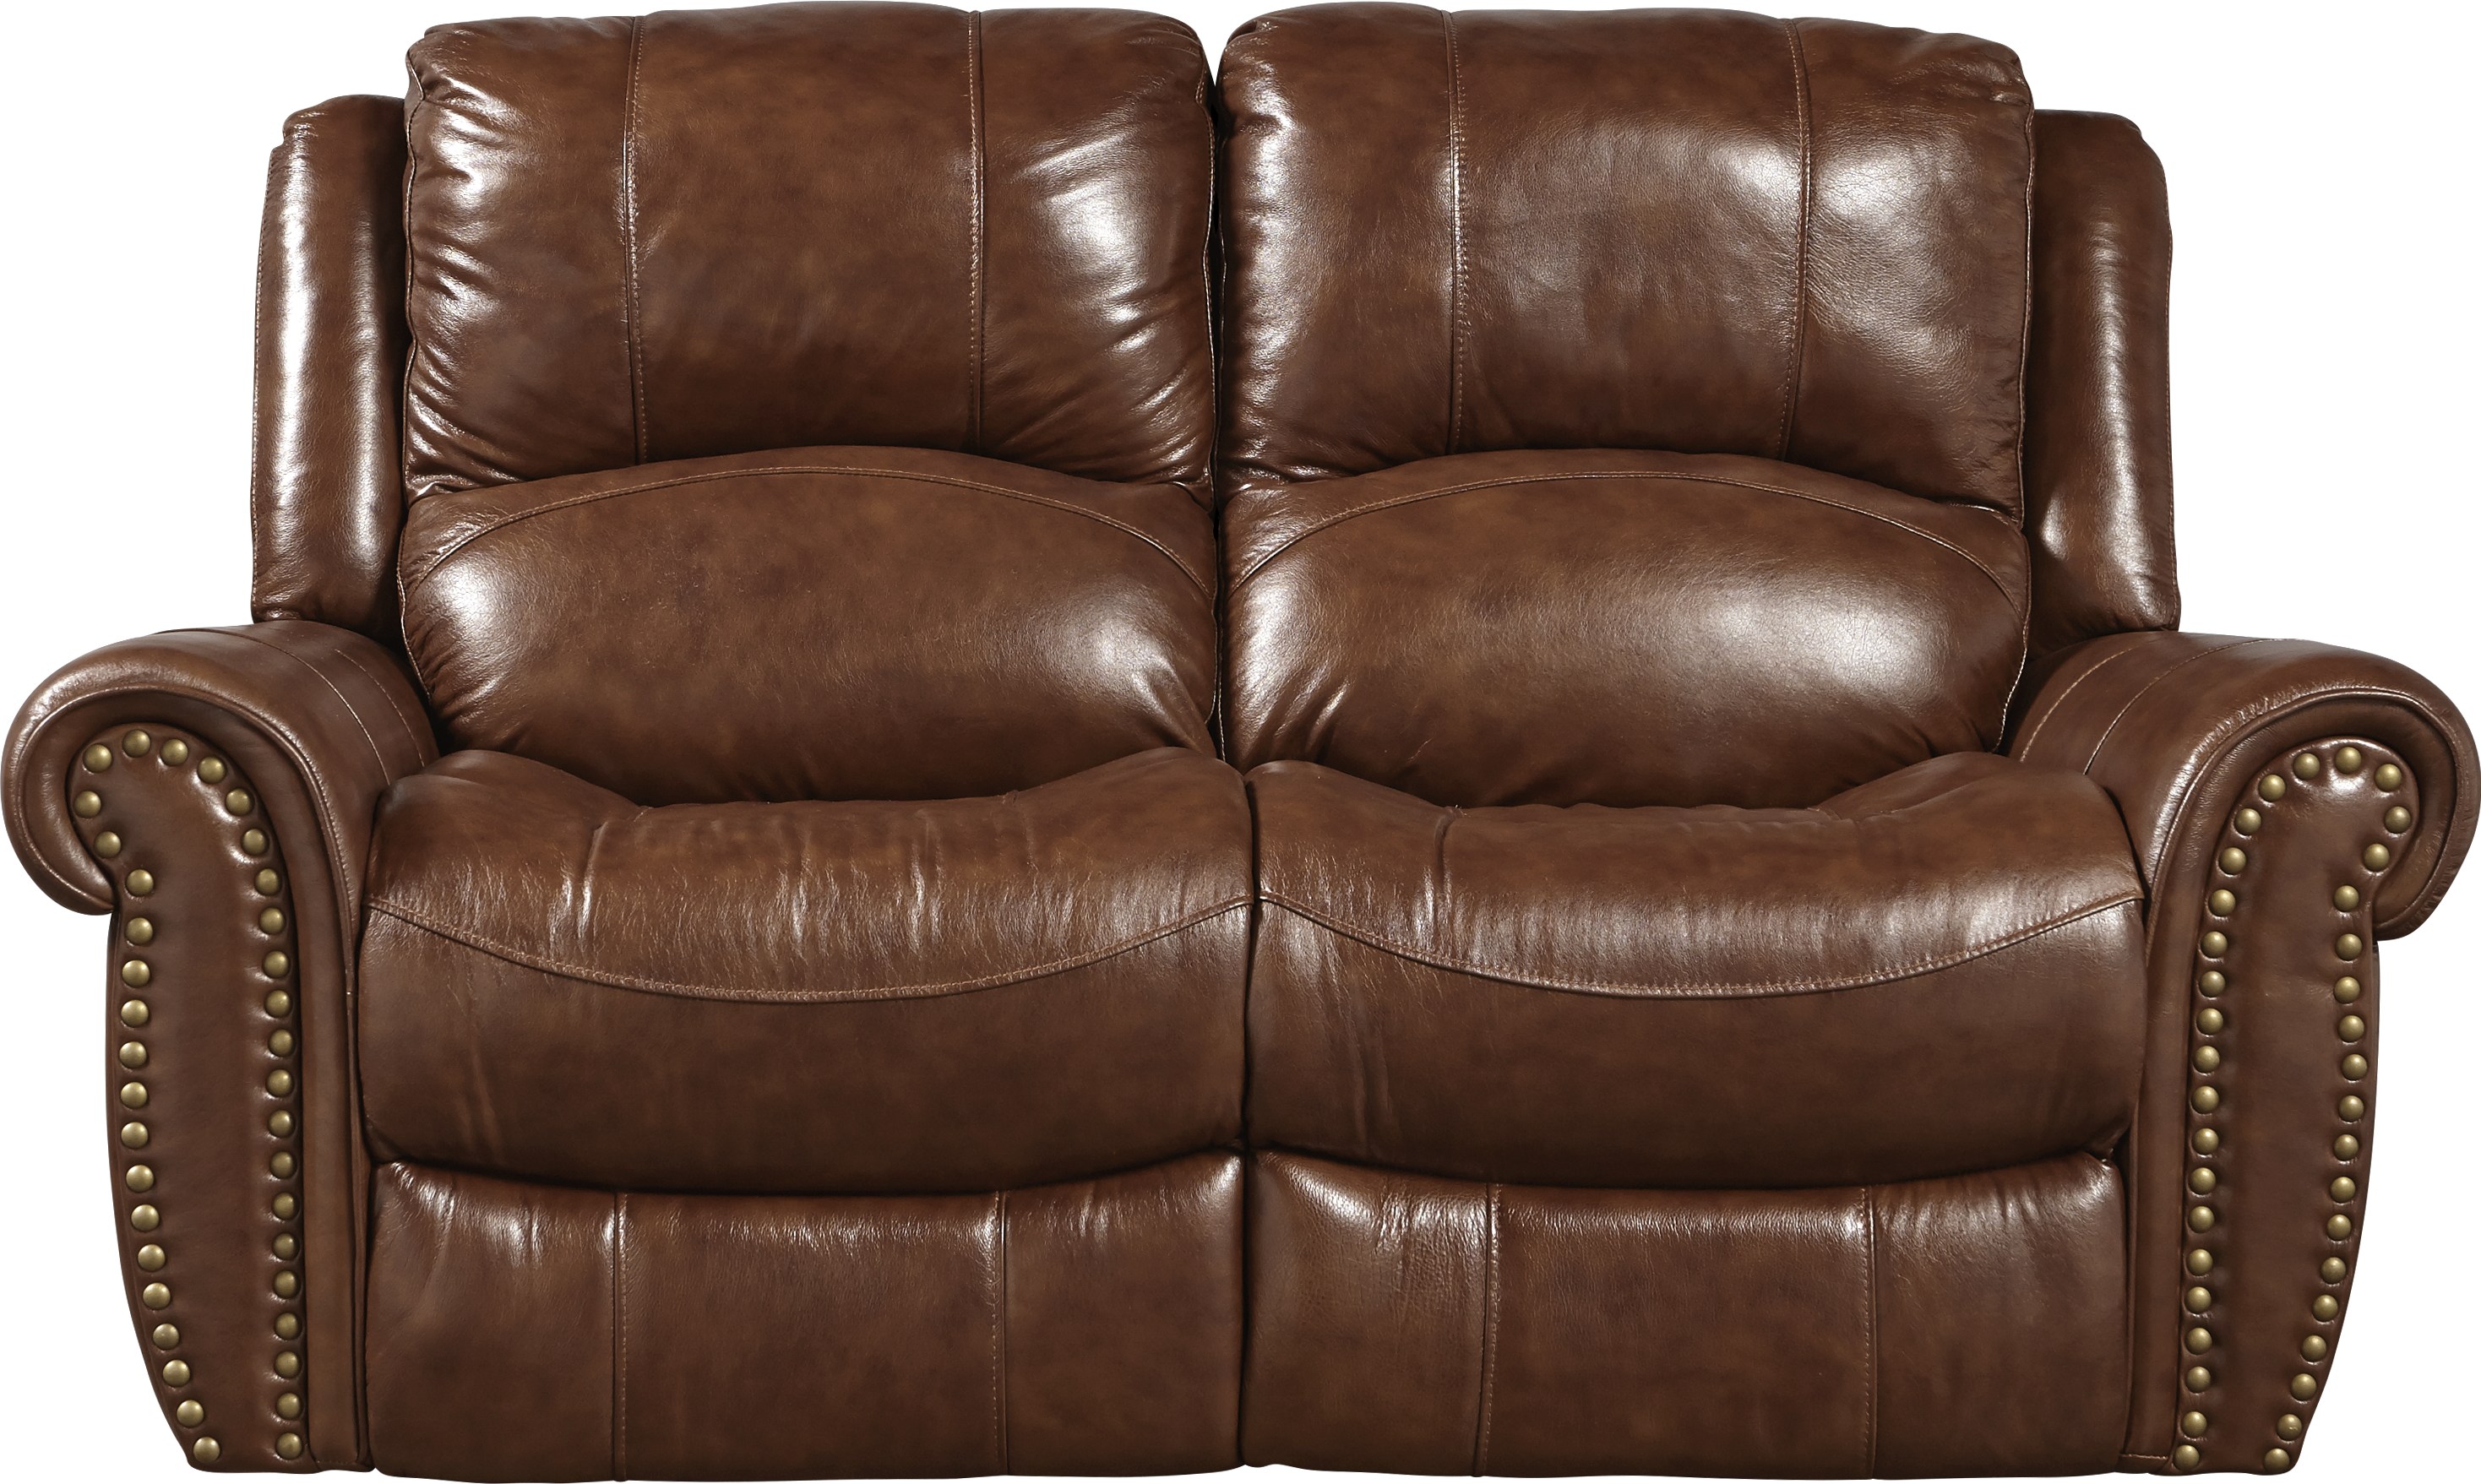 Abruzzo Brown Leather Reclining Loveseat